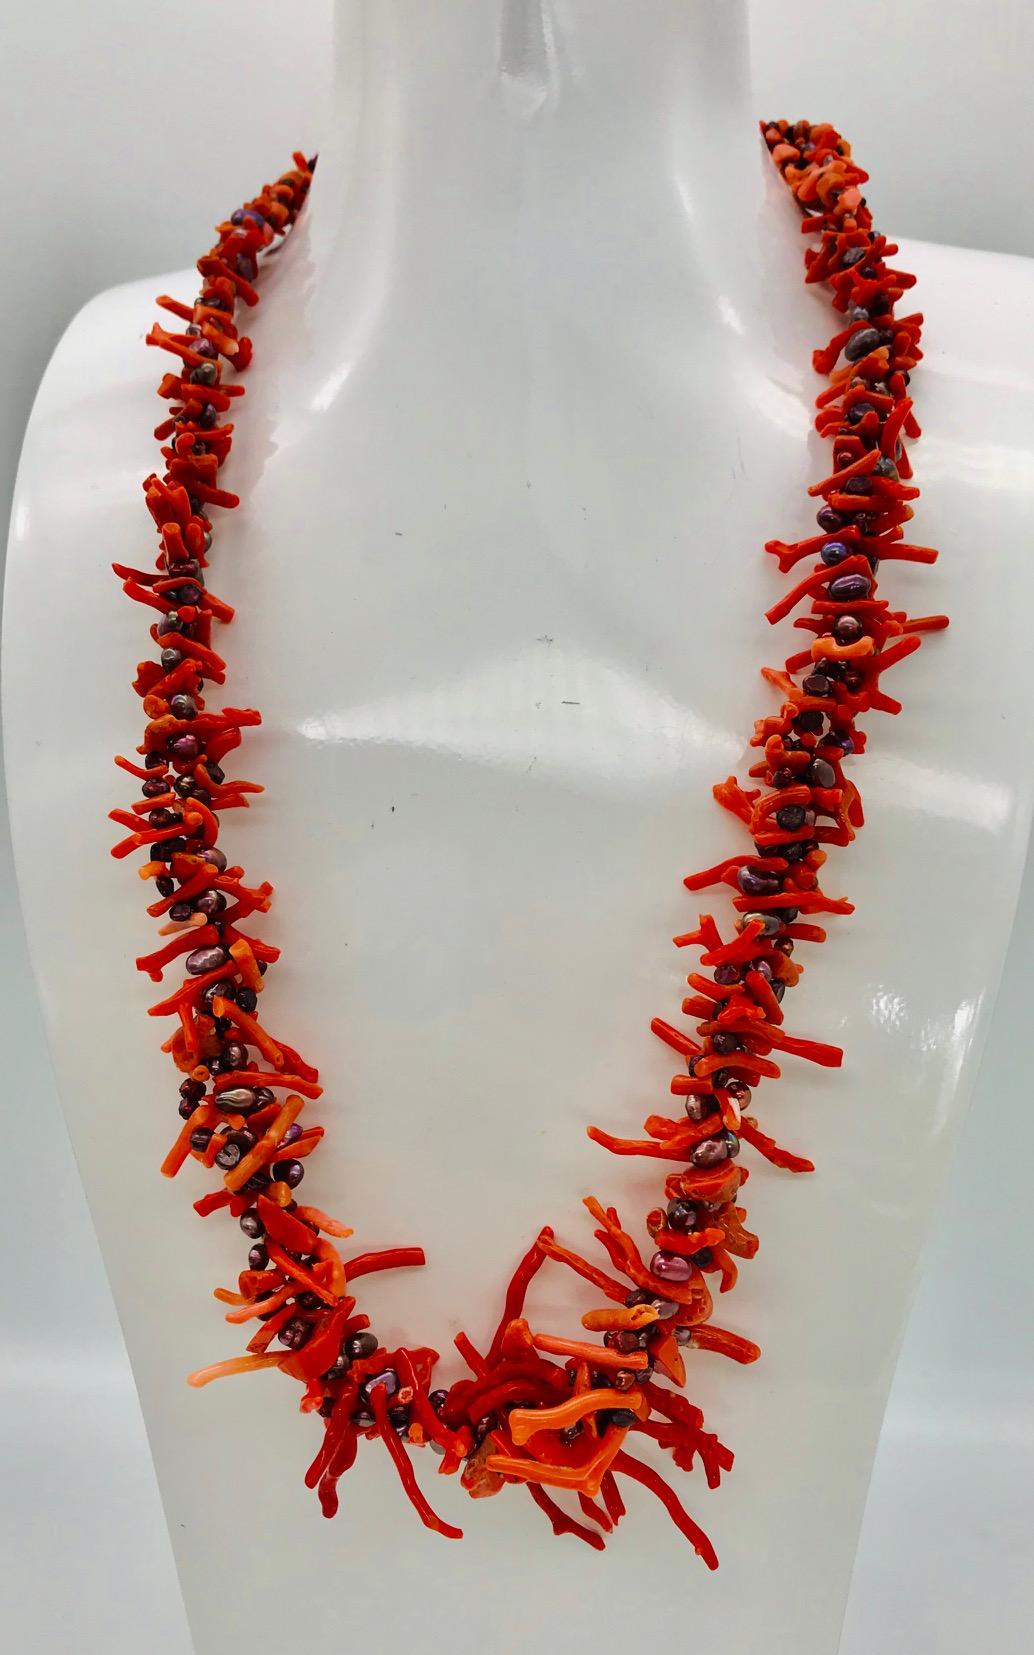 Vintage Mediterranean Branch Coral and small Pearls up-cycled into a stunning necklace of three braided strands.Coral harvesting is restricted and controlled due to its endangered status and rarity which consistently raises its price.
Sylvia